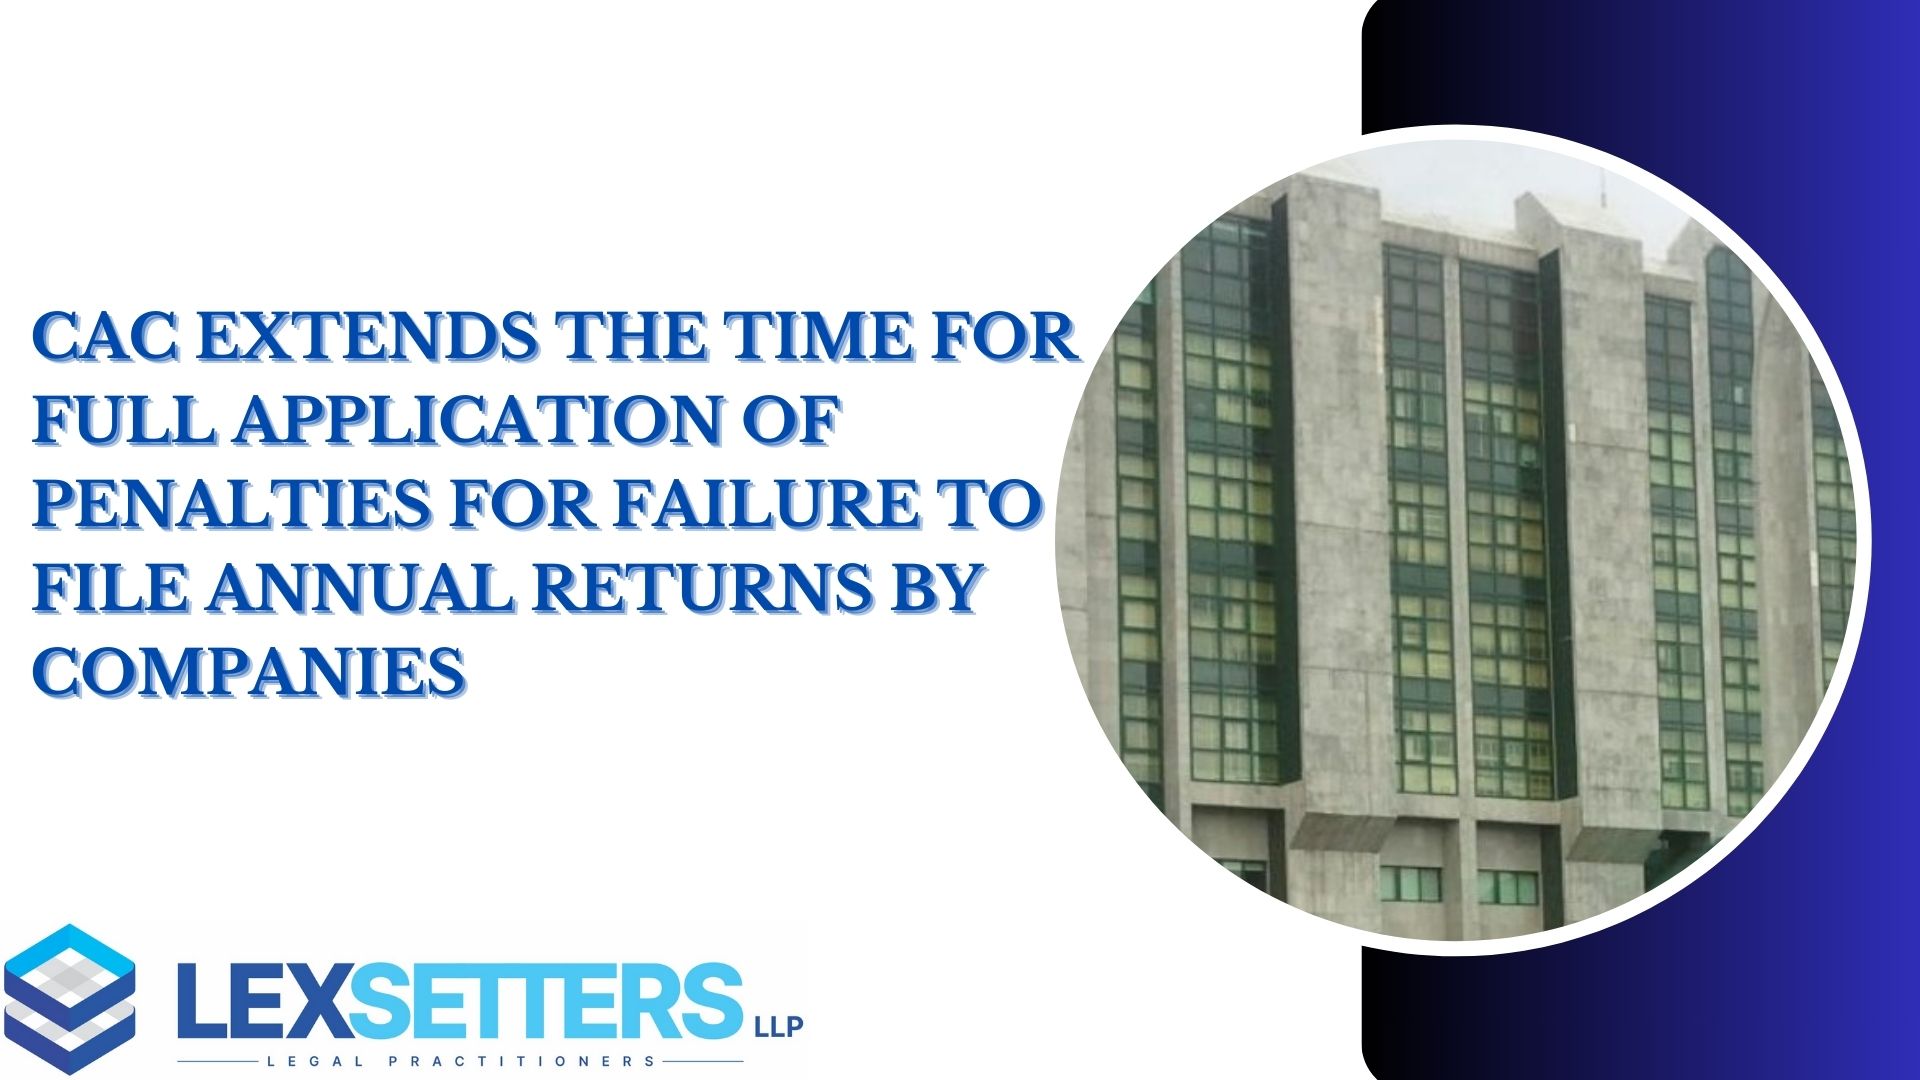 THE CAC EXTENDS THE TIME FOR FULL APPLICATION OF PENALTIES FOR FAILURE TO FILE ANNUAL RETURNS BY COMPANIES